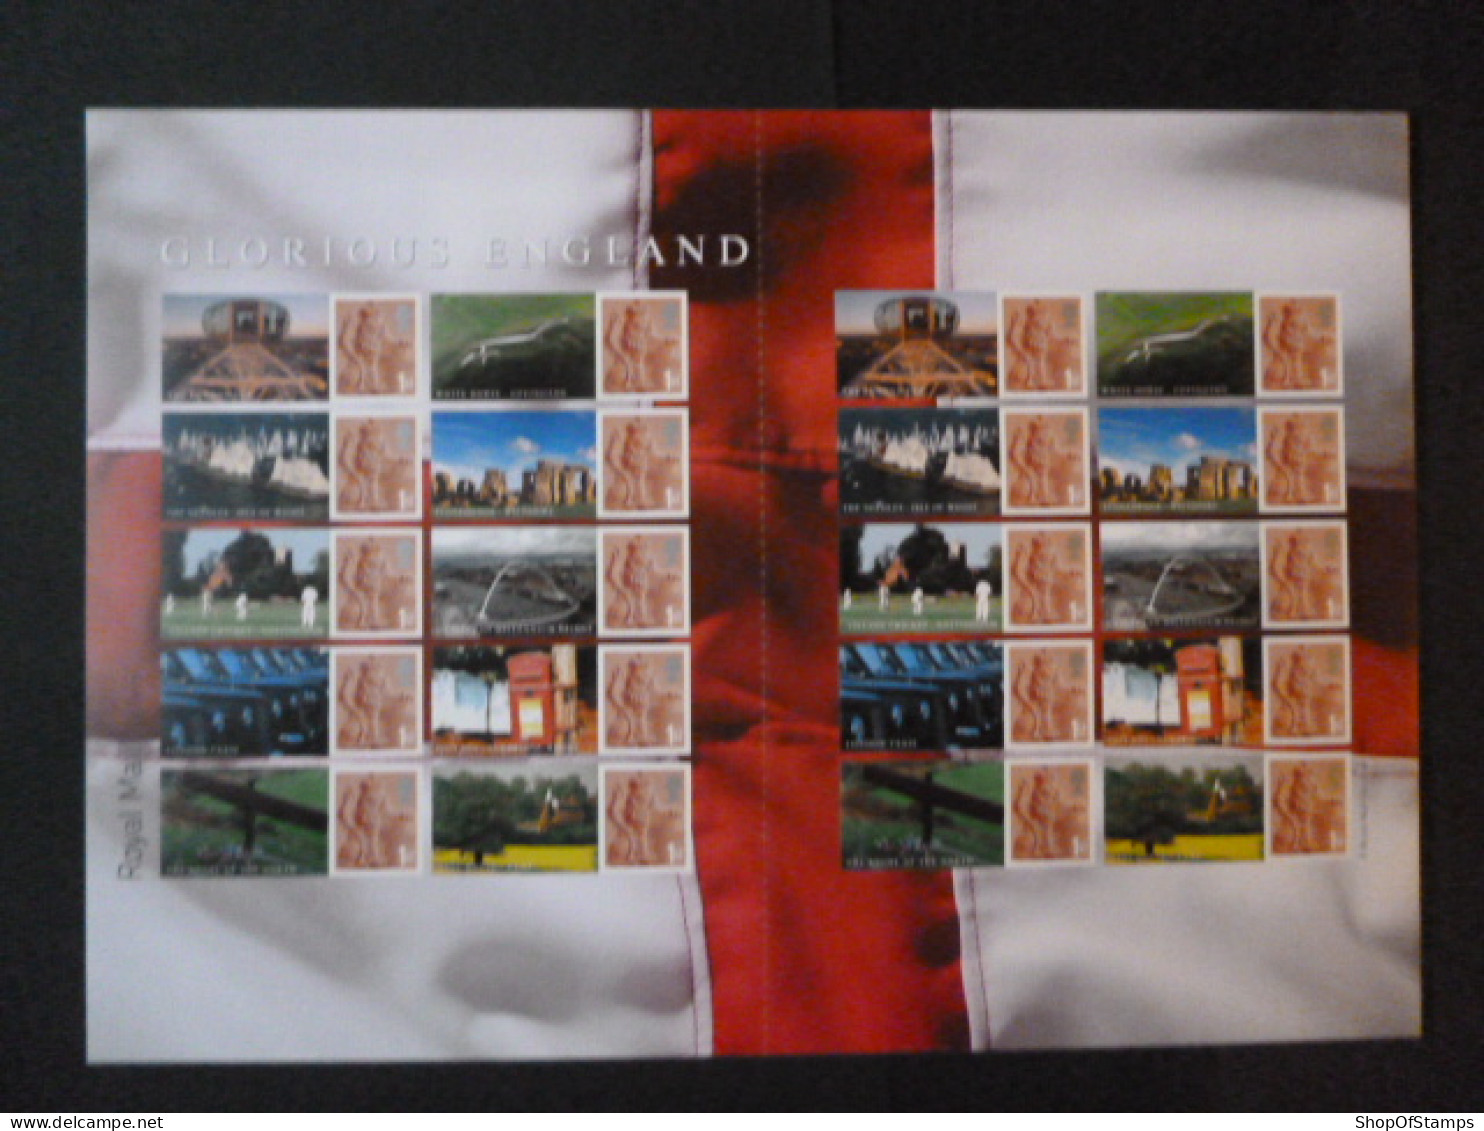 GREAT BRITAIN SG EN7 GLORIOUS ENGLAND 20 STAMPS SMILER SHEET WITH GUTTERS & LABELS - Sheets, Plate Blocks & Multiples